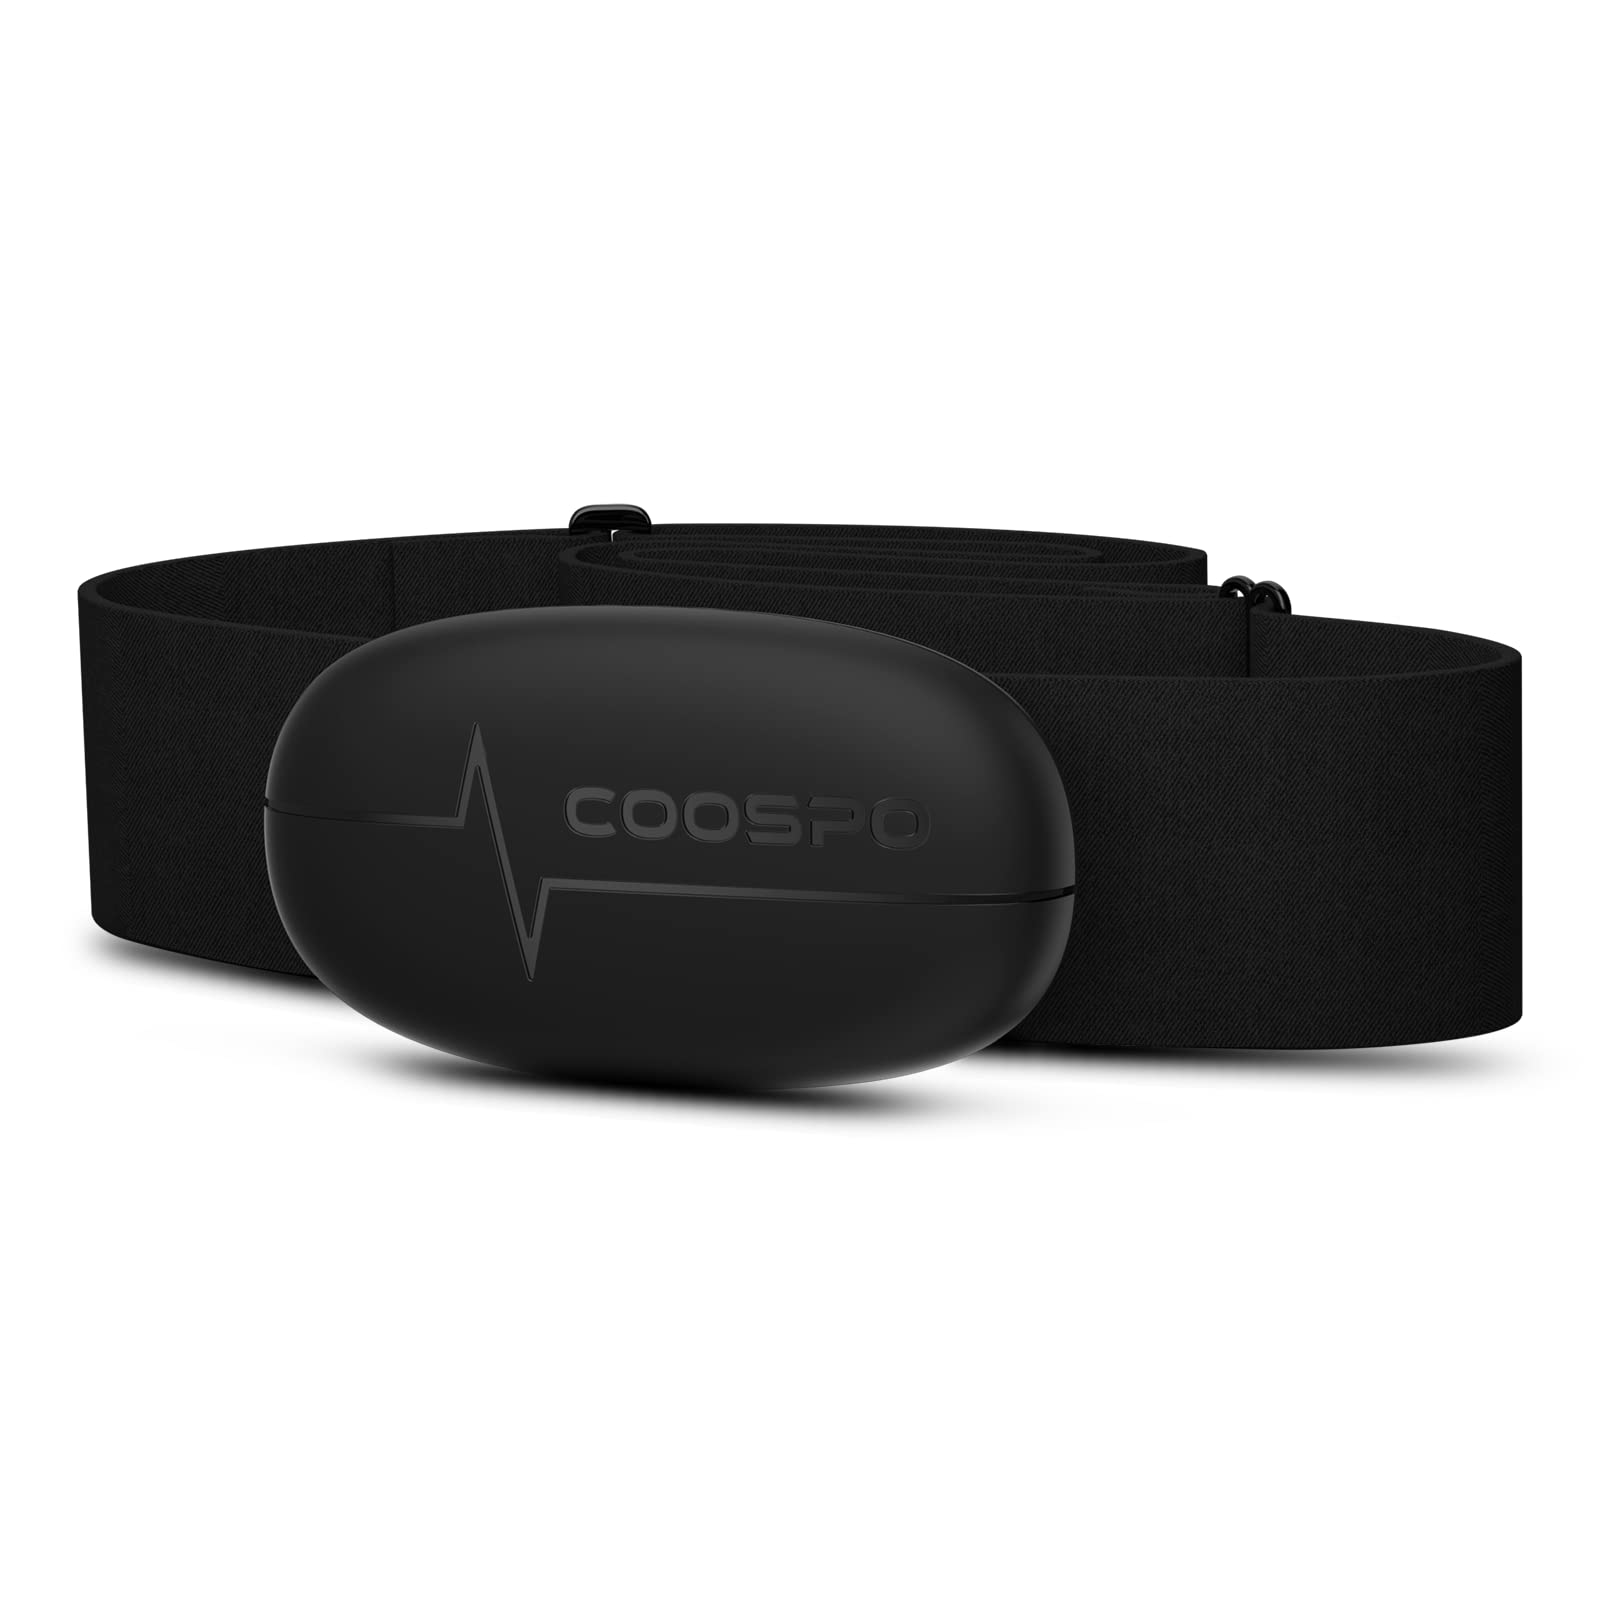 CooSpo Heart Rate Monitor Bluetooth ANT+ with Chest Strap for Running Cycling Gym and other Sports